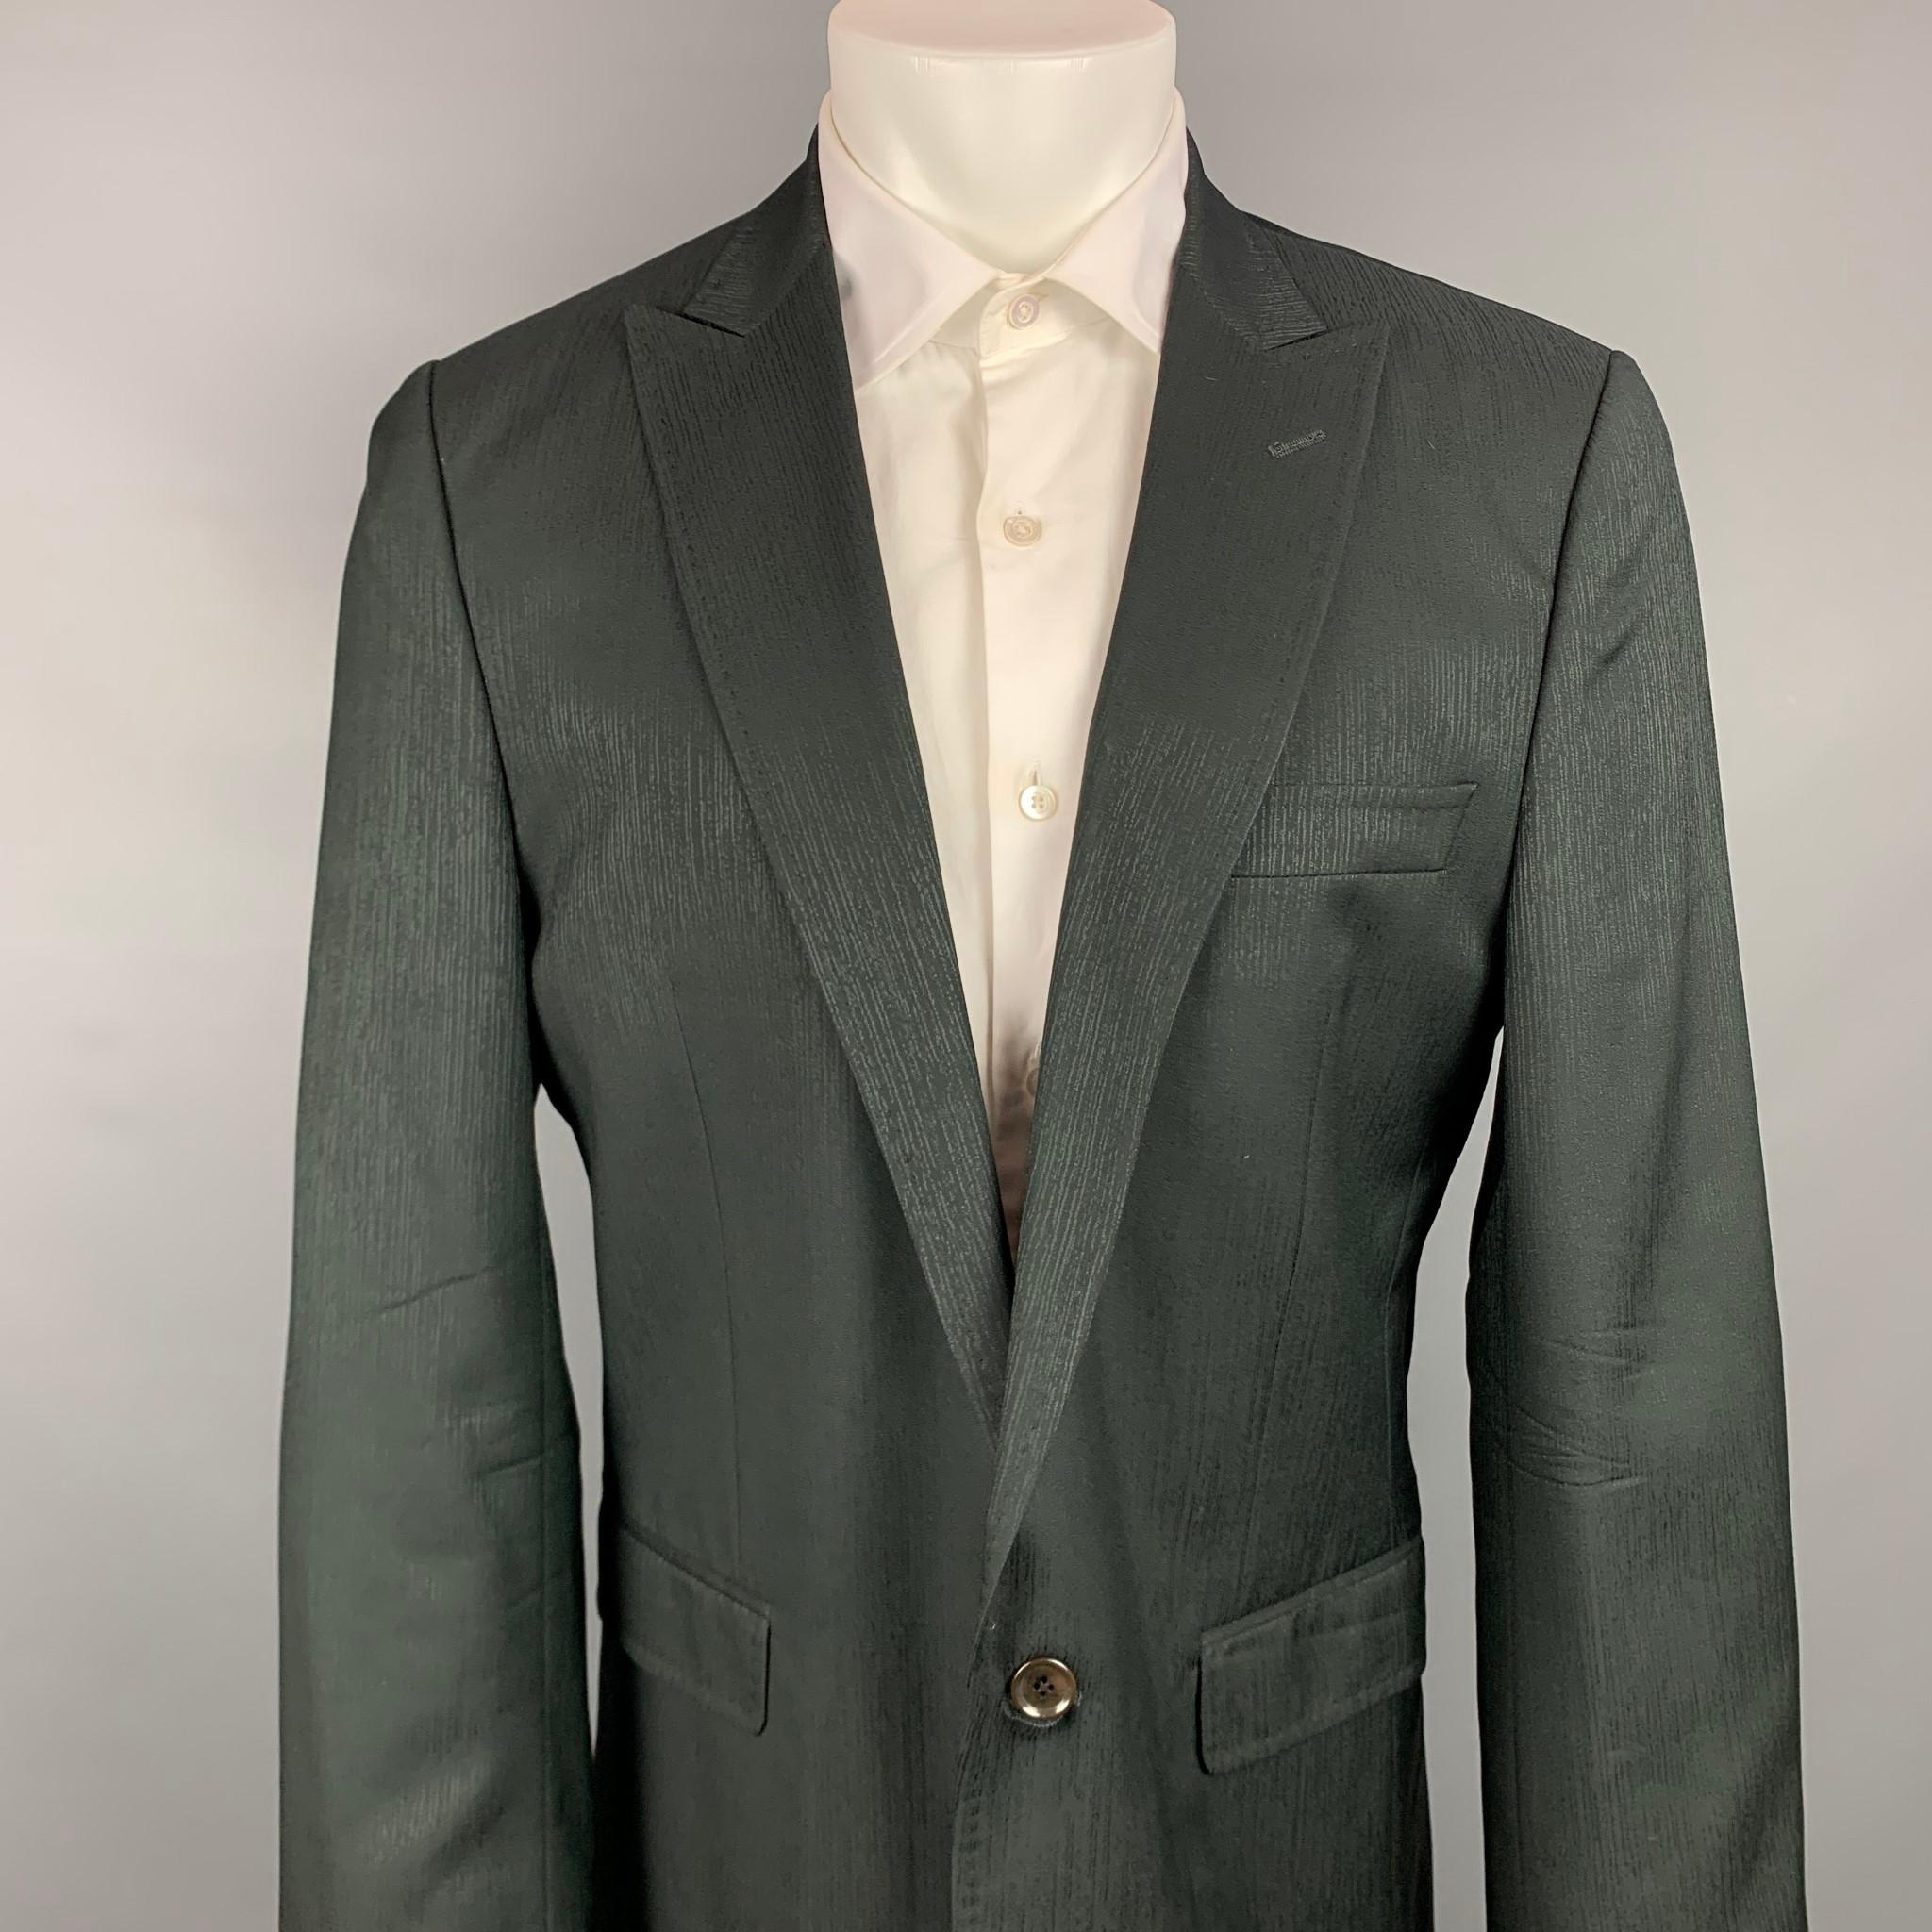 DOLCE & GABBANA sport coat comes in a black wool / viscose with a full liner featuring a peak lapel, flap pockets, and a single button closure. Made in Italy.

Very Good Pre-Owned Condition.
Marked: IT 52

Measurements:

Shoulder: 18 in.
Chest: 44